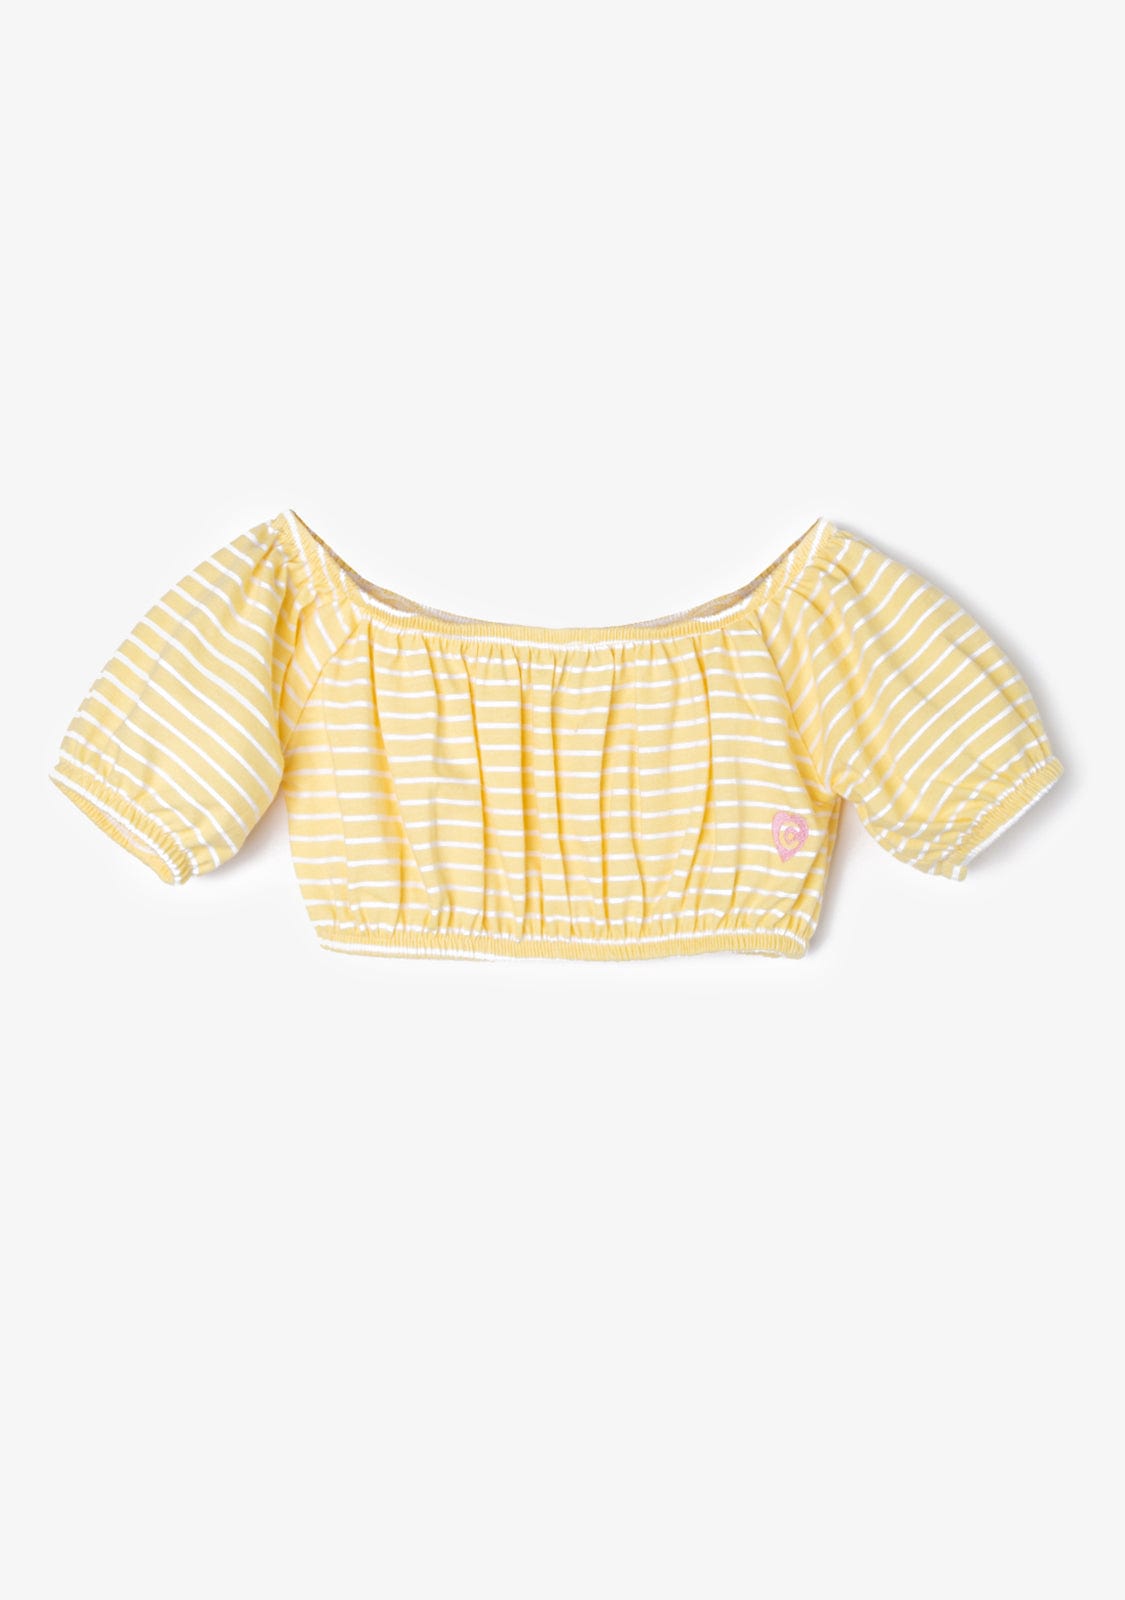 CONGUITOS TEXTIL Clothing Girl's Yellow Striped Top